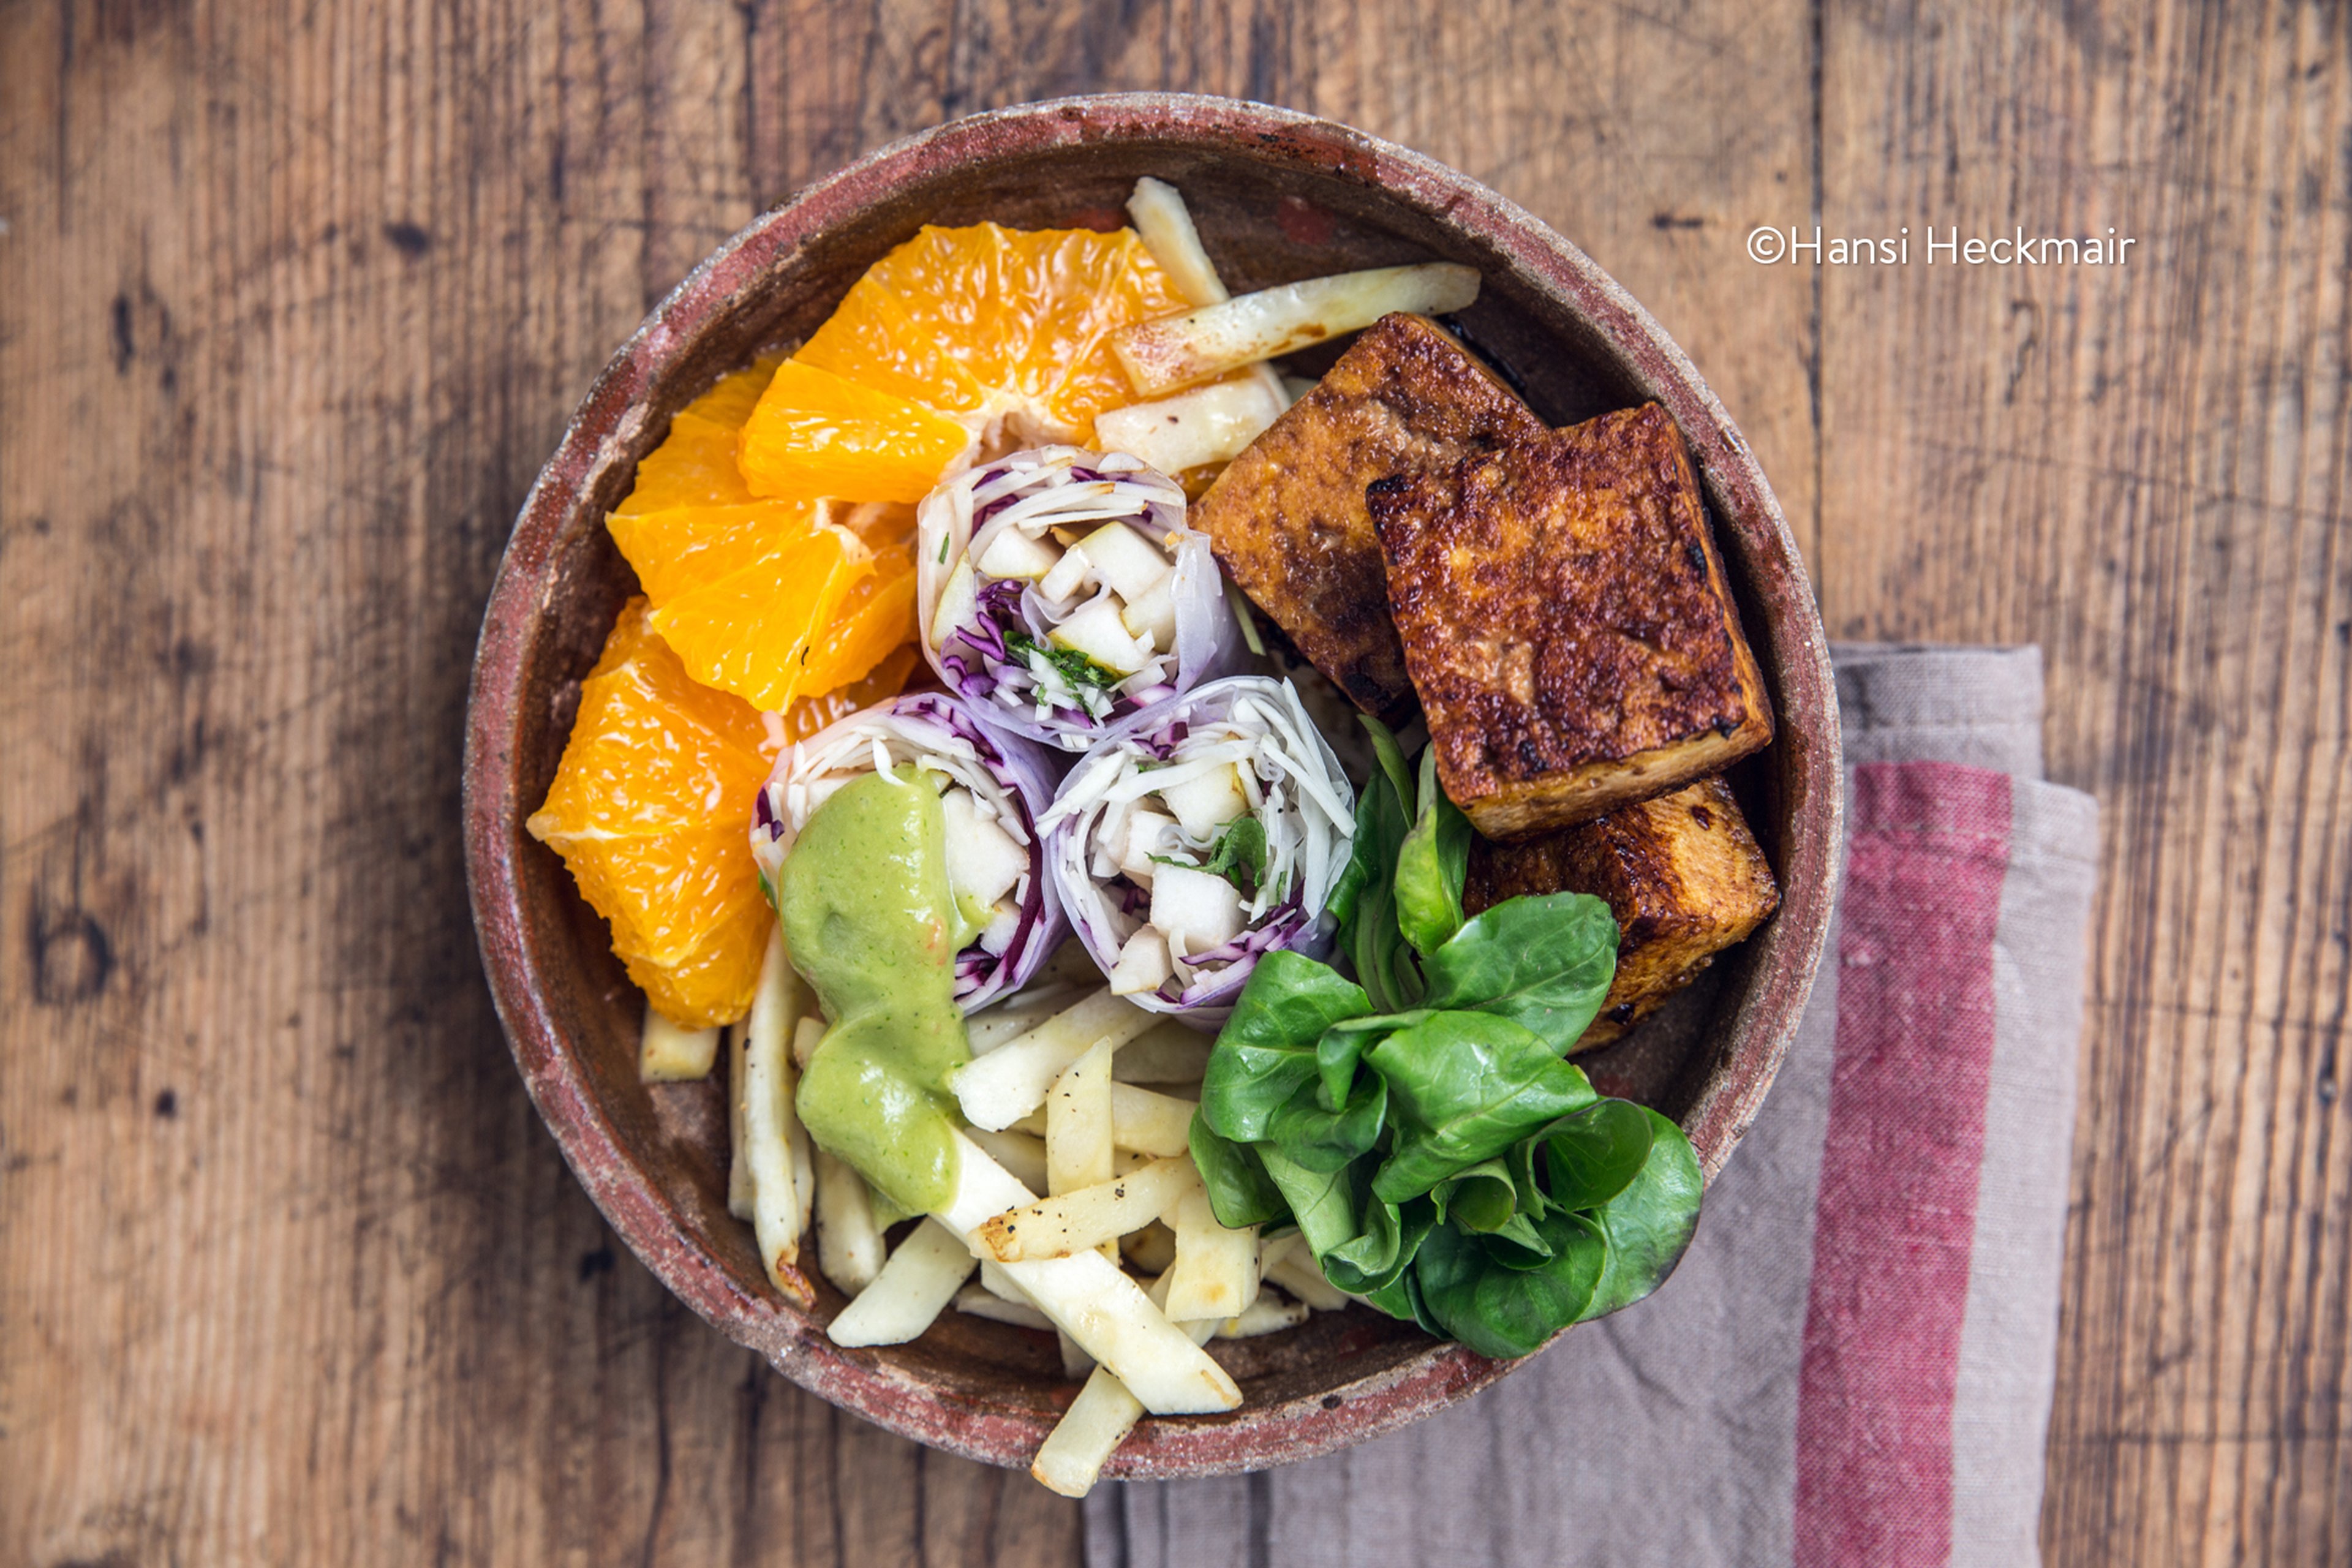 Salad bowl with summer rolls, spicy tofu, parsnips, and orange